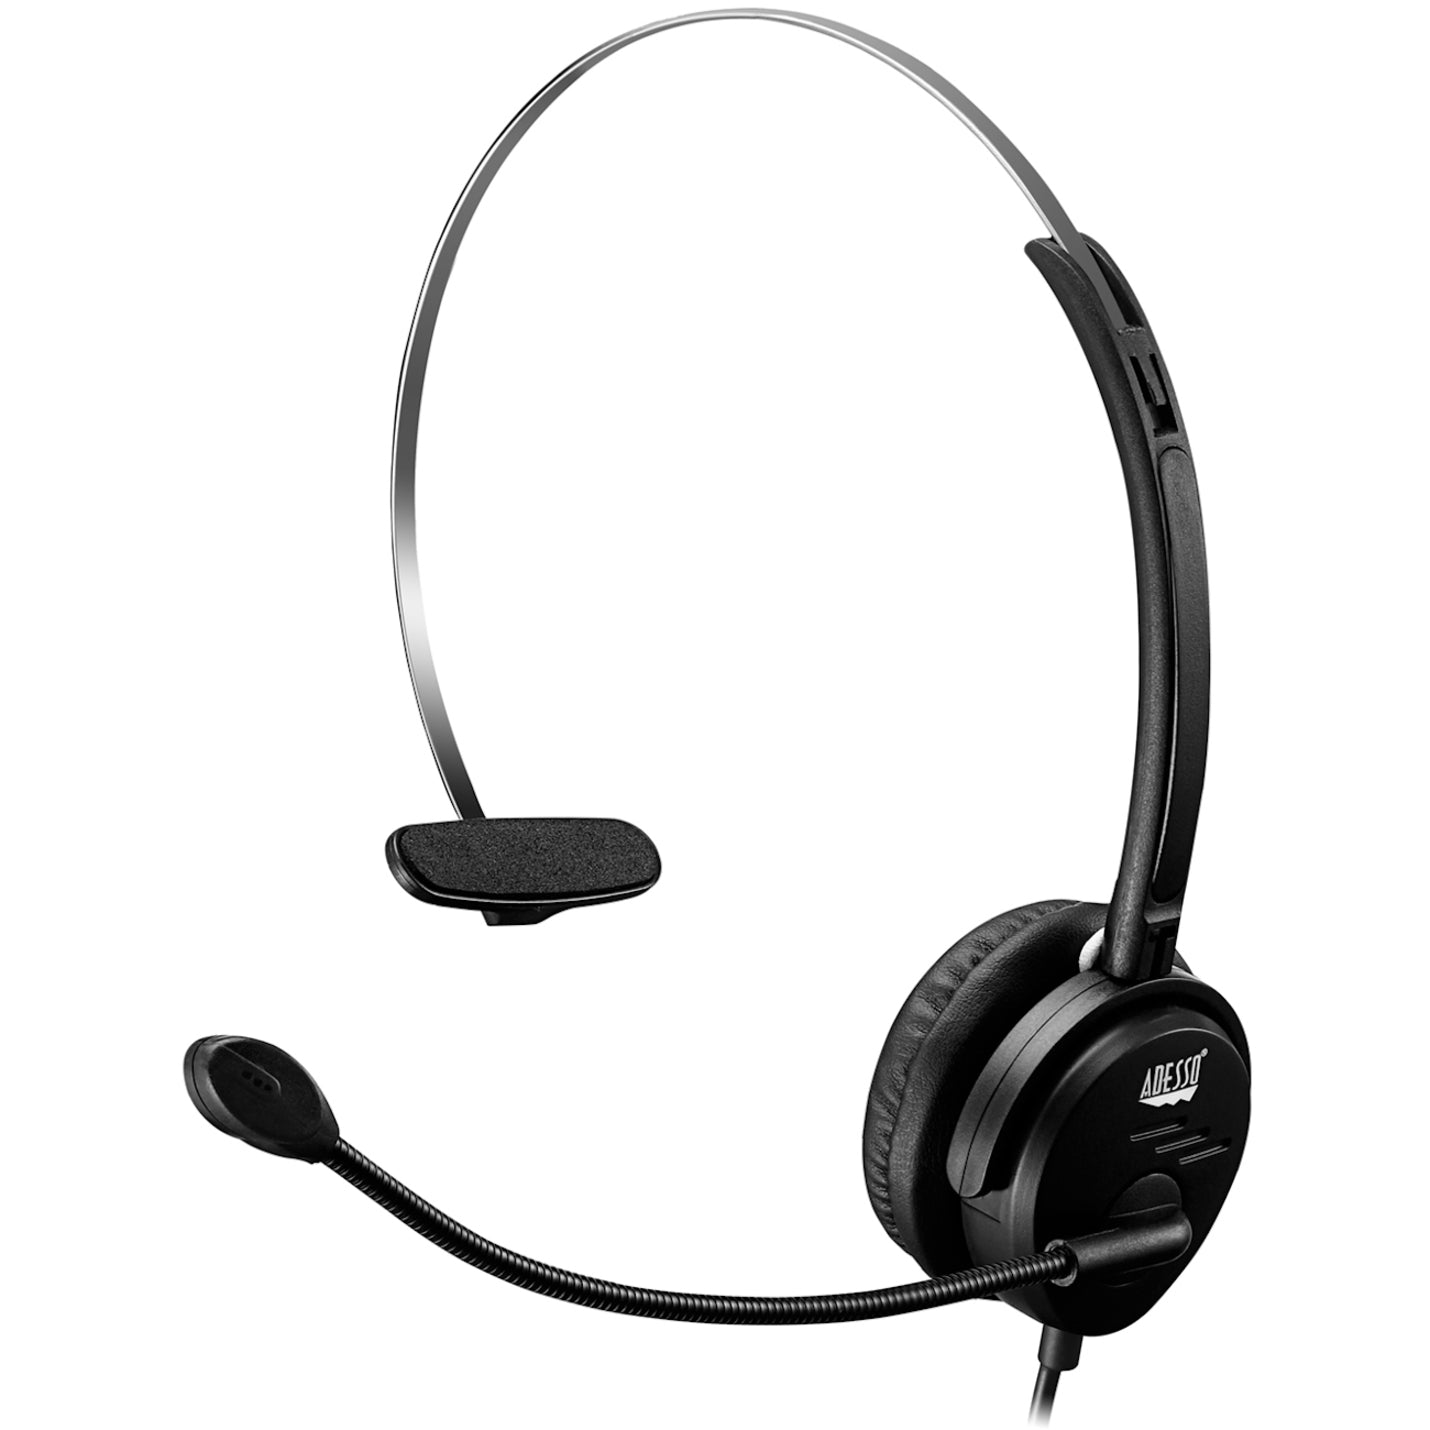 Adesso XTREAM P1 USB Single-Sided Headset with Adjustable Microphone, Wired Mono Headset